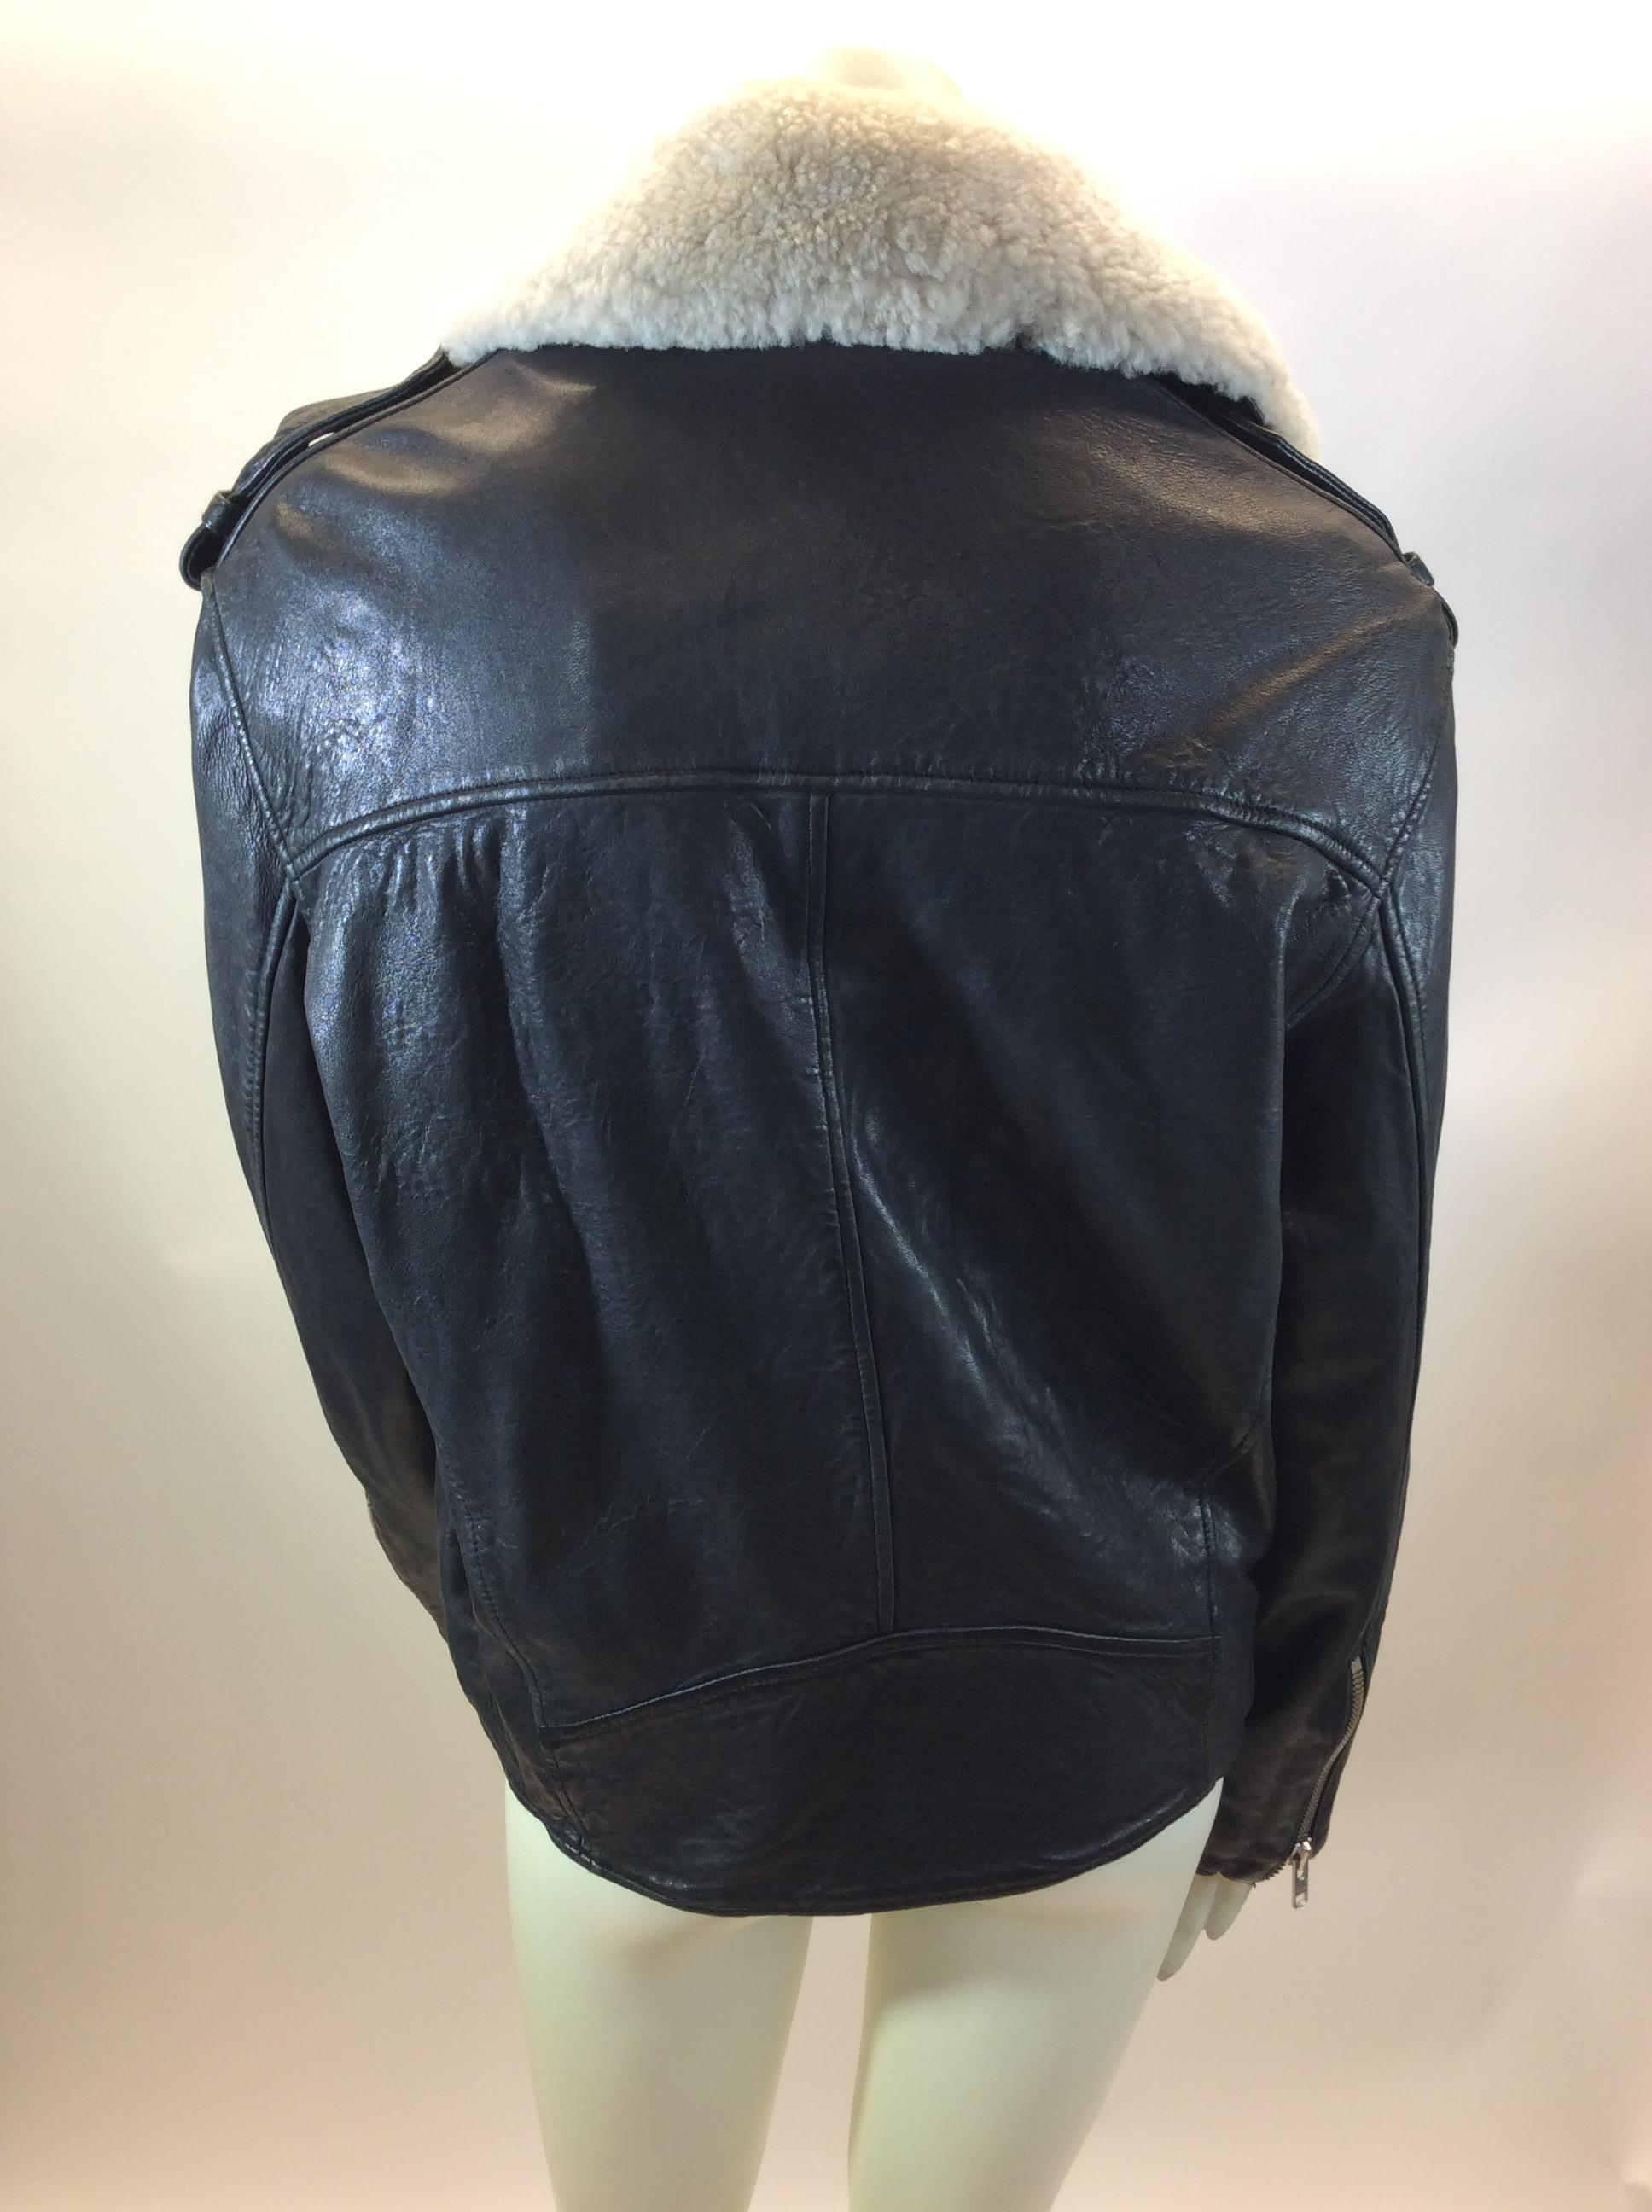 Isabel Marant Black Leather Jacket In Good Condition For Sale In Narberth, PA